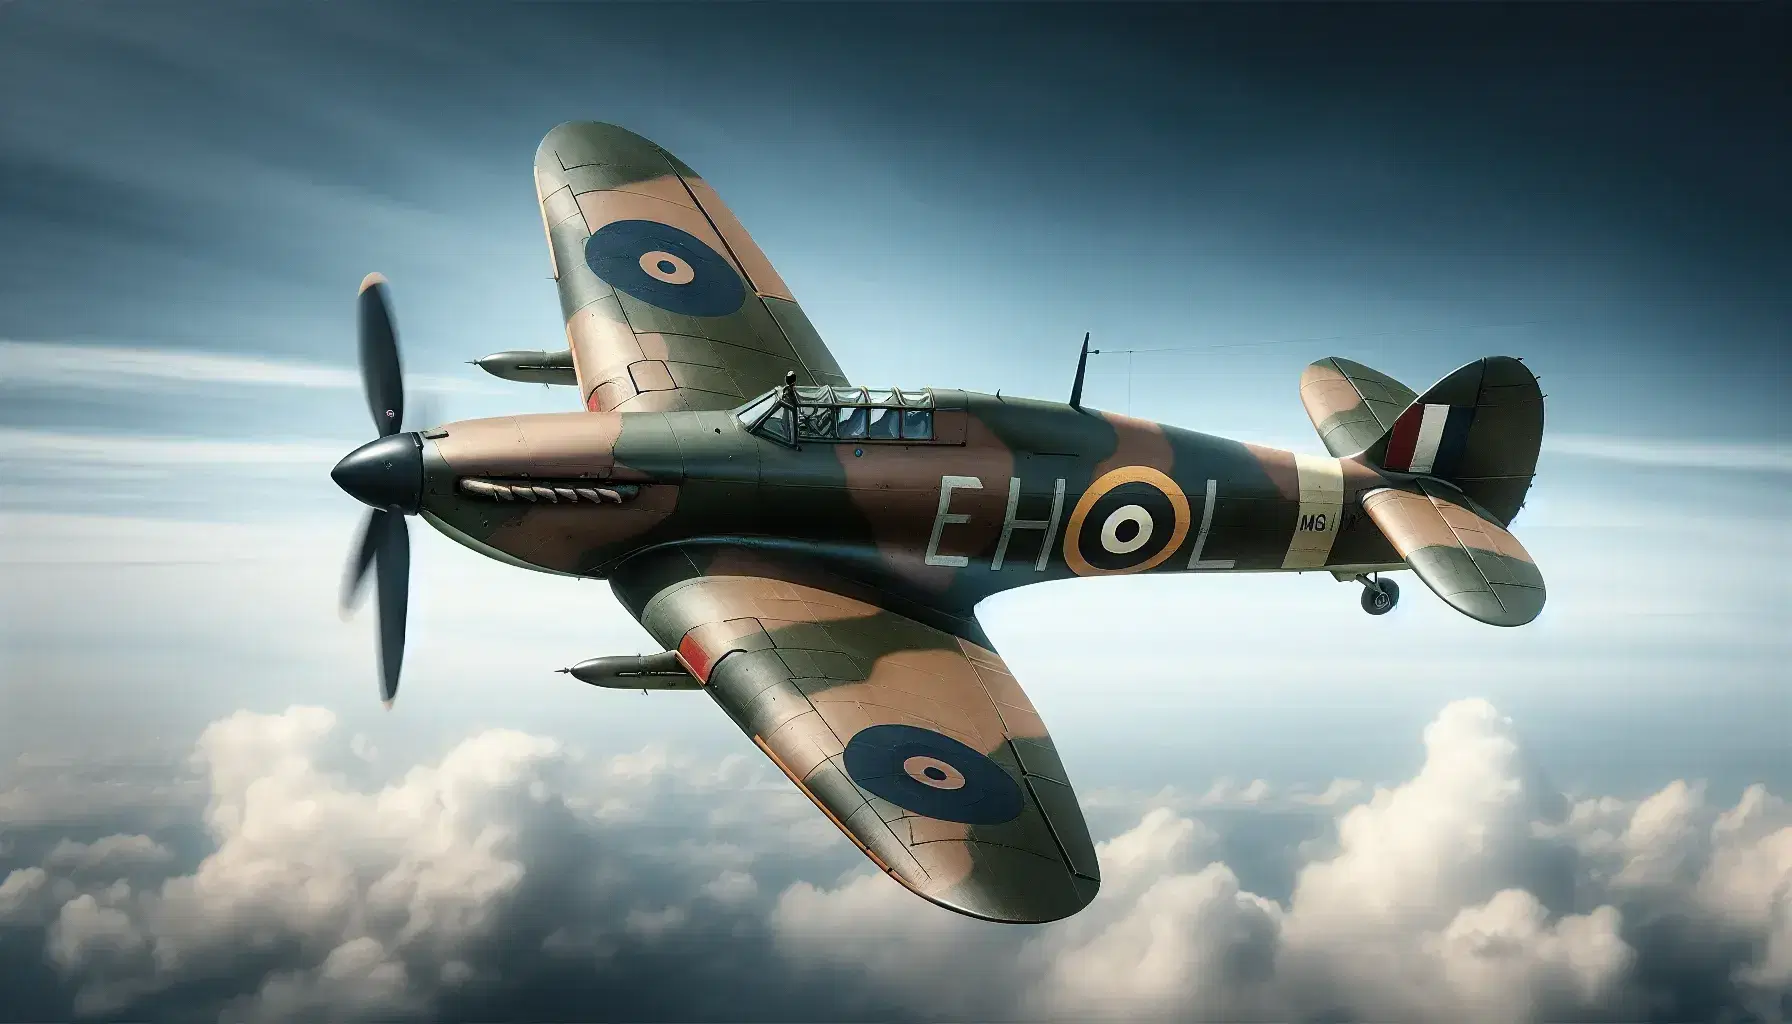 Hawker Hurricane fighter in flight with green and brown camouflage livery, sky-grey belly, moving propeller and blue sky with clouds.